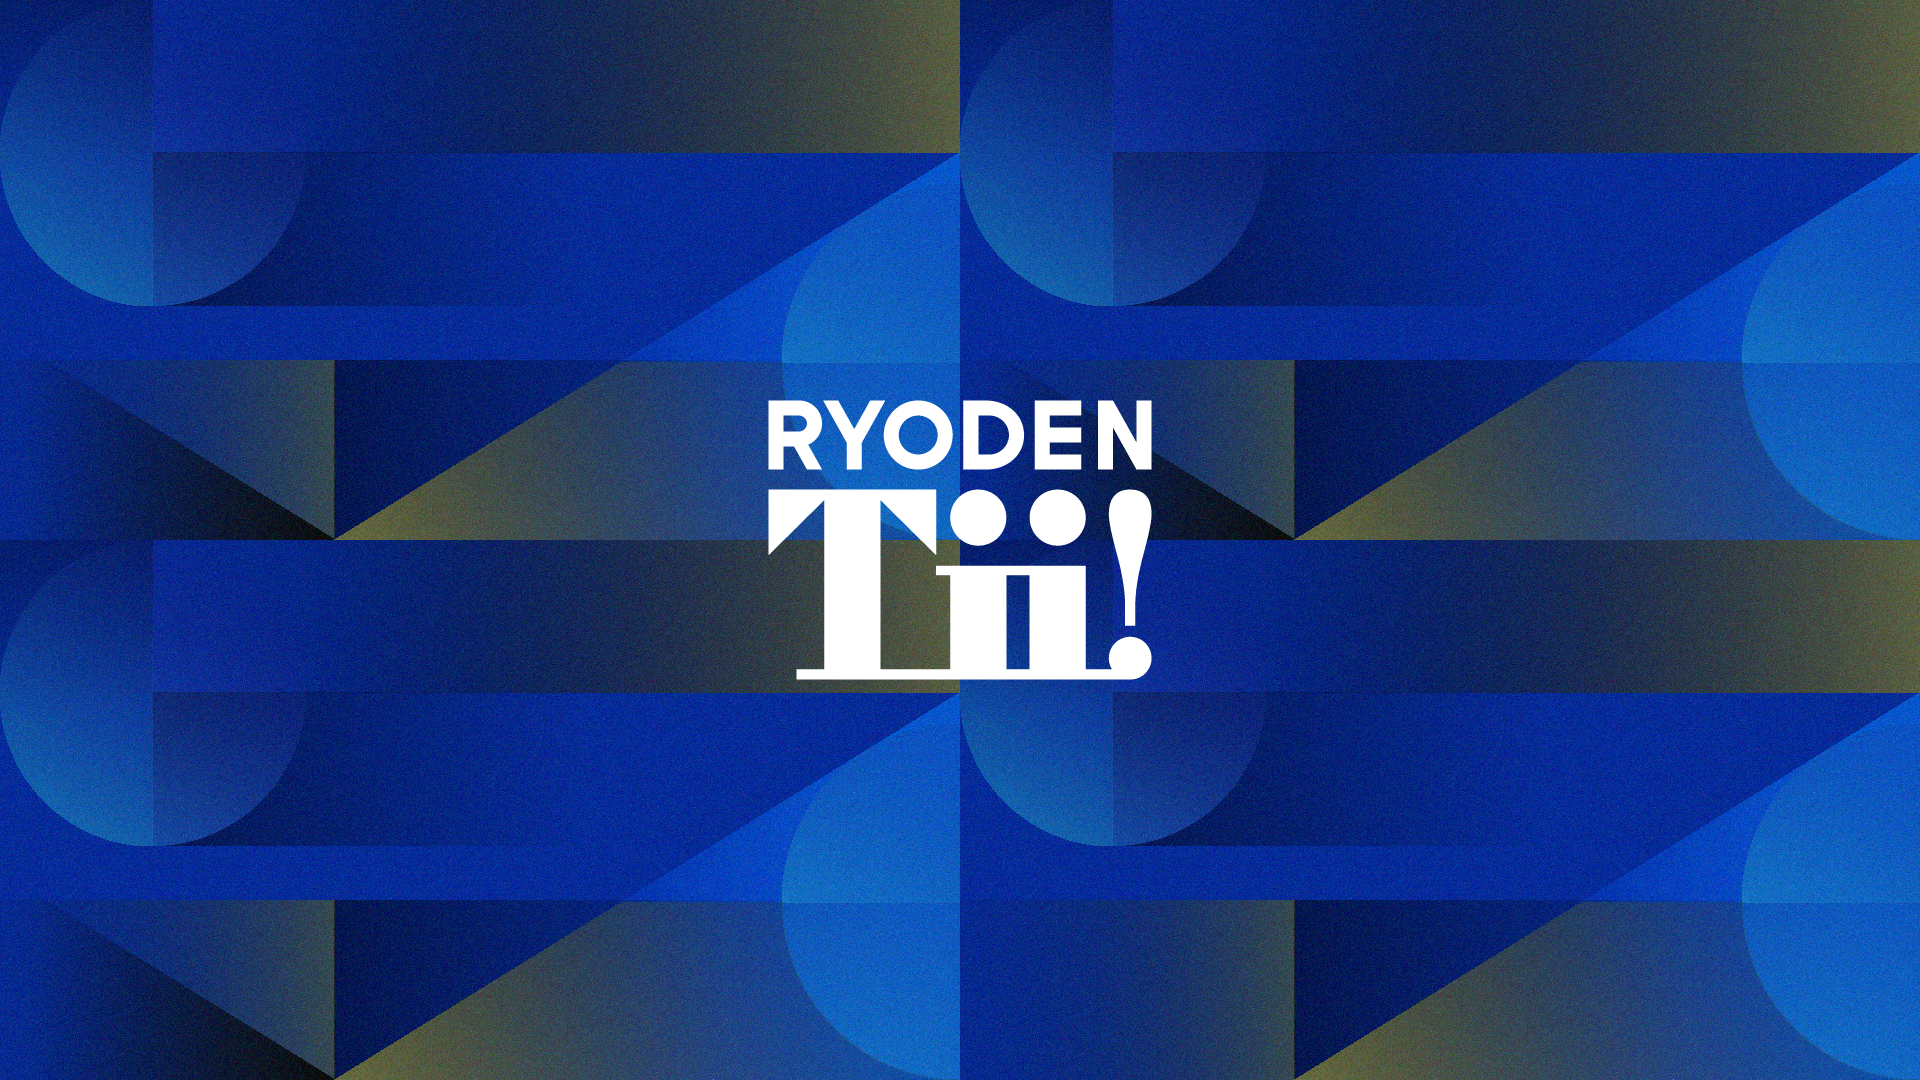 RYODEN Tii!のロゴ